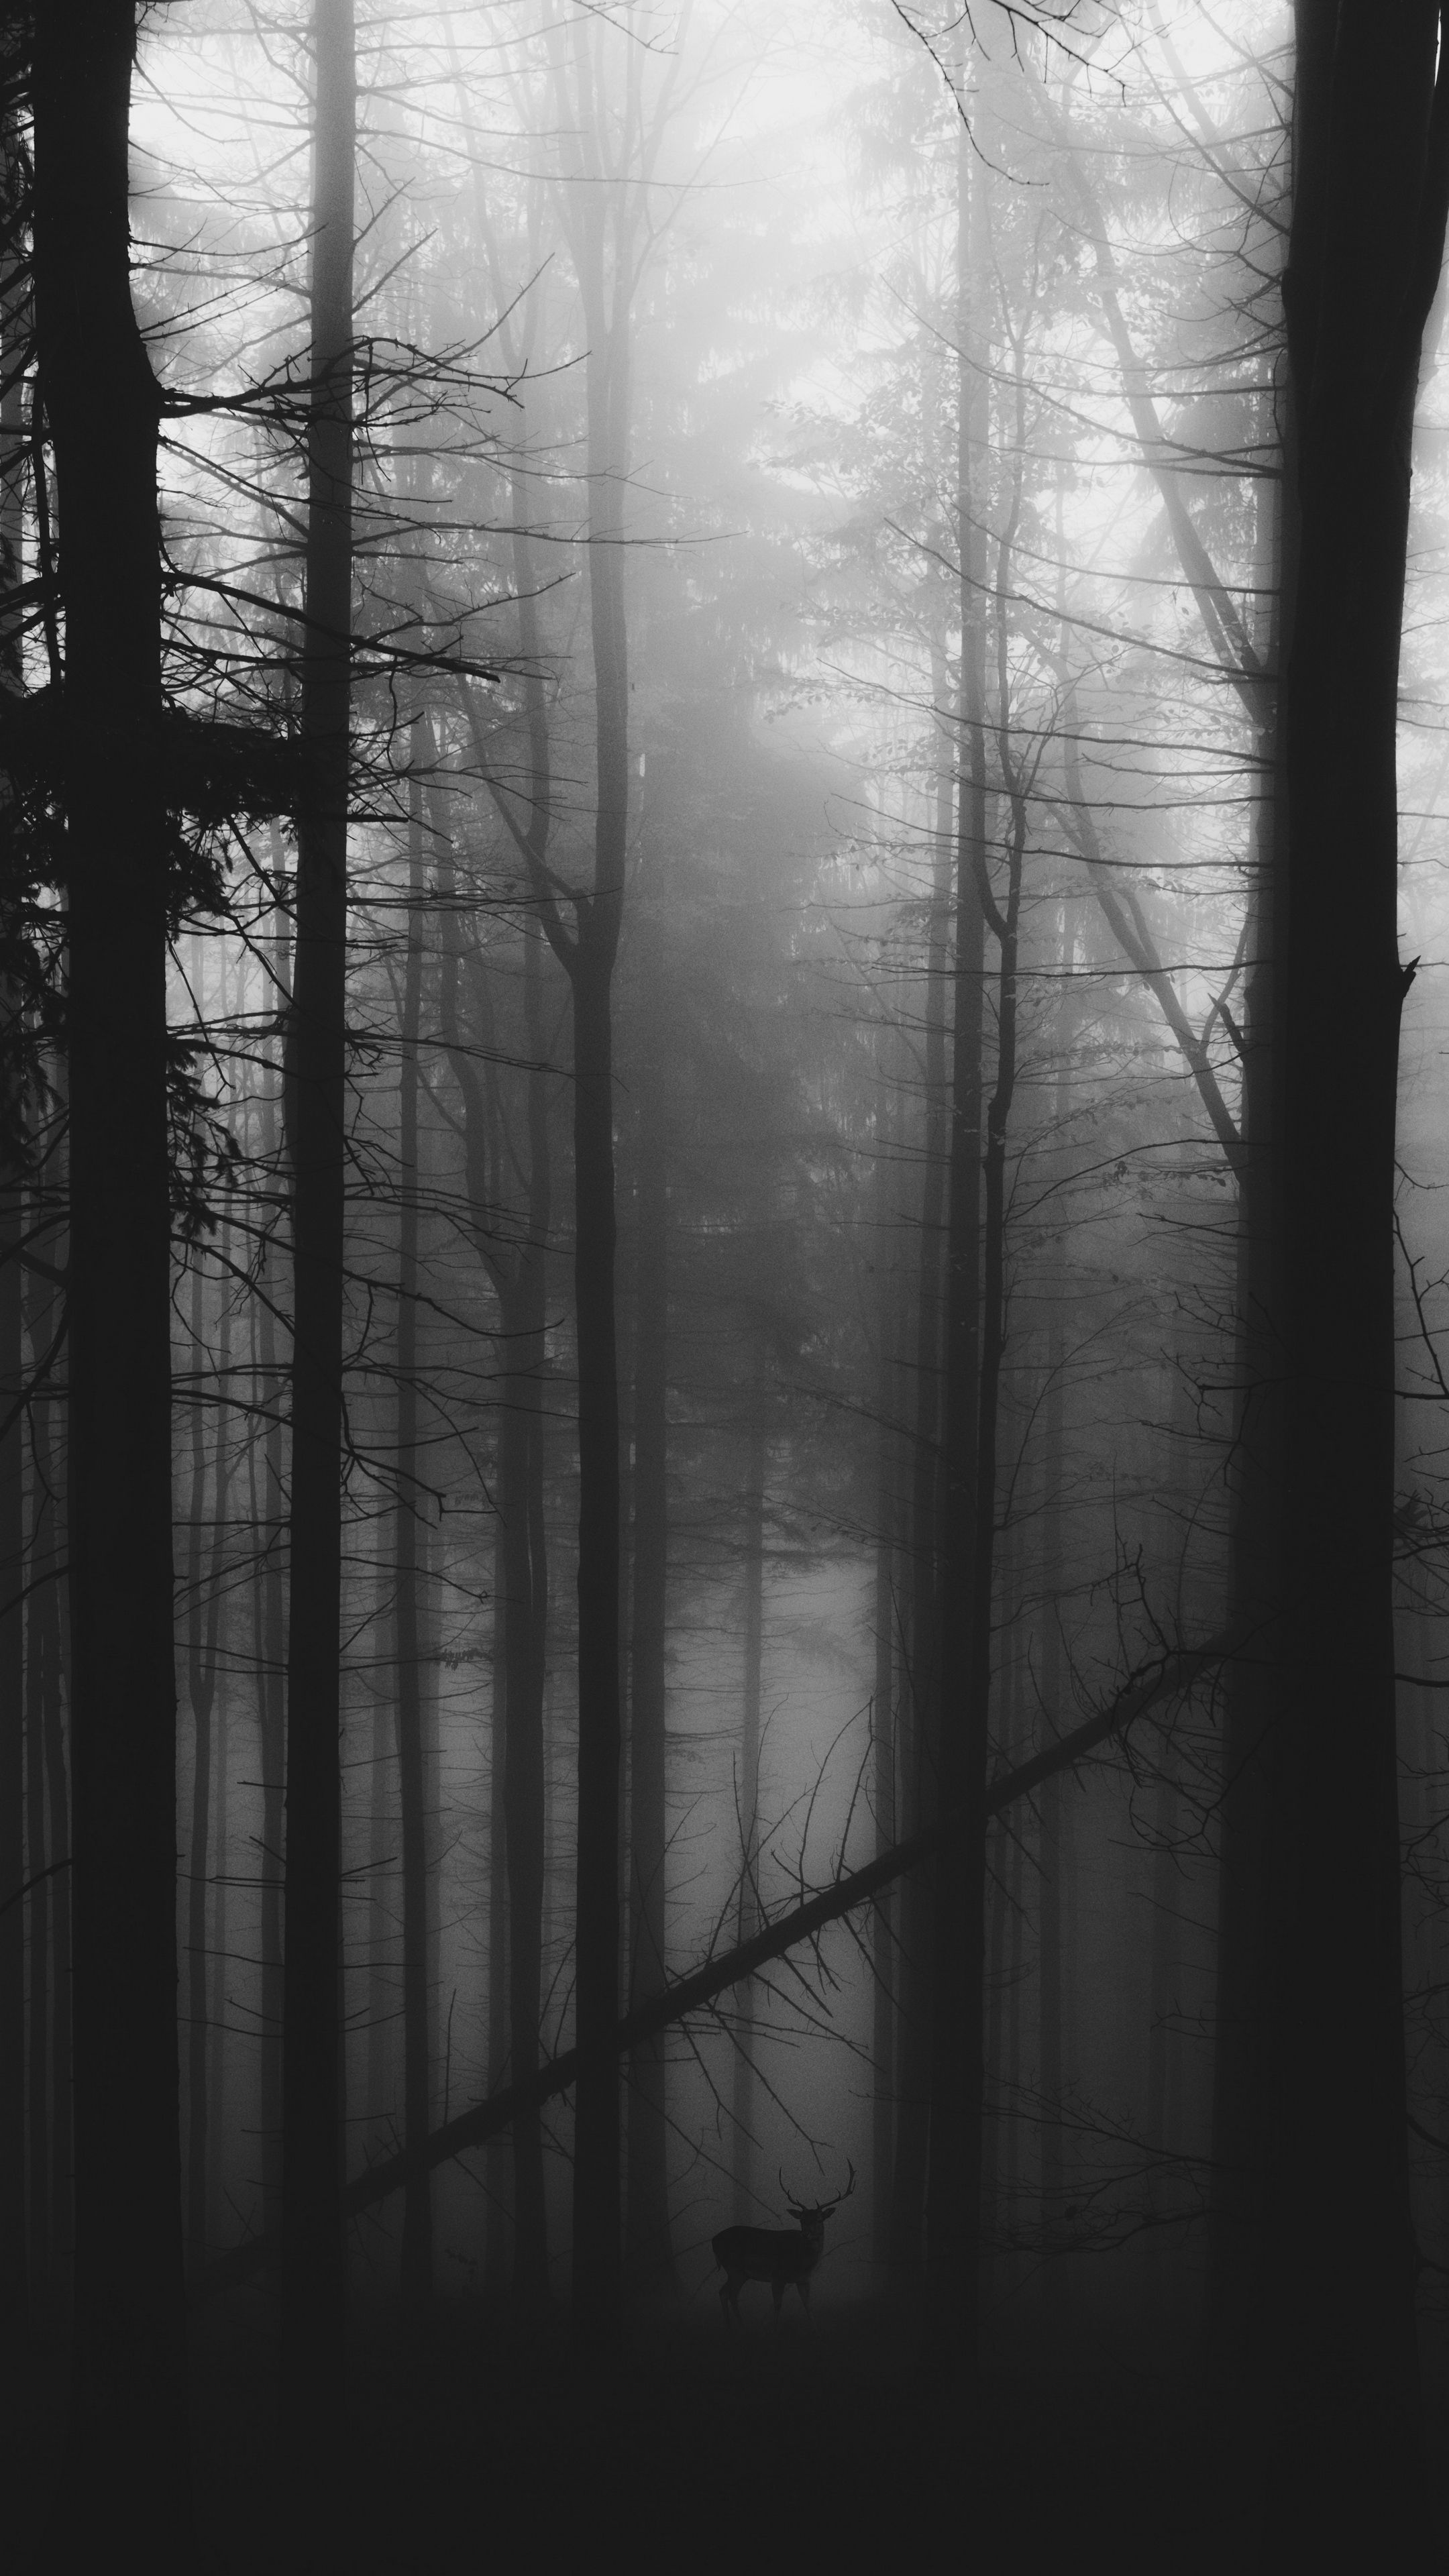 A black and white photo of some trees - Foggy forest